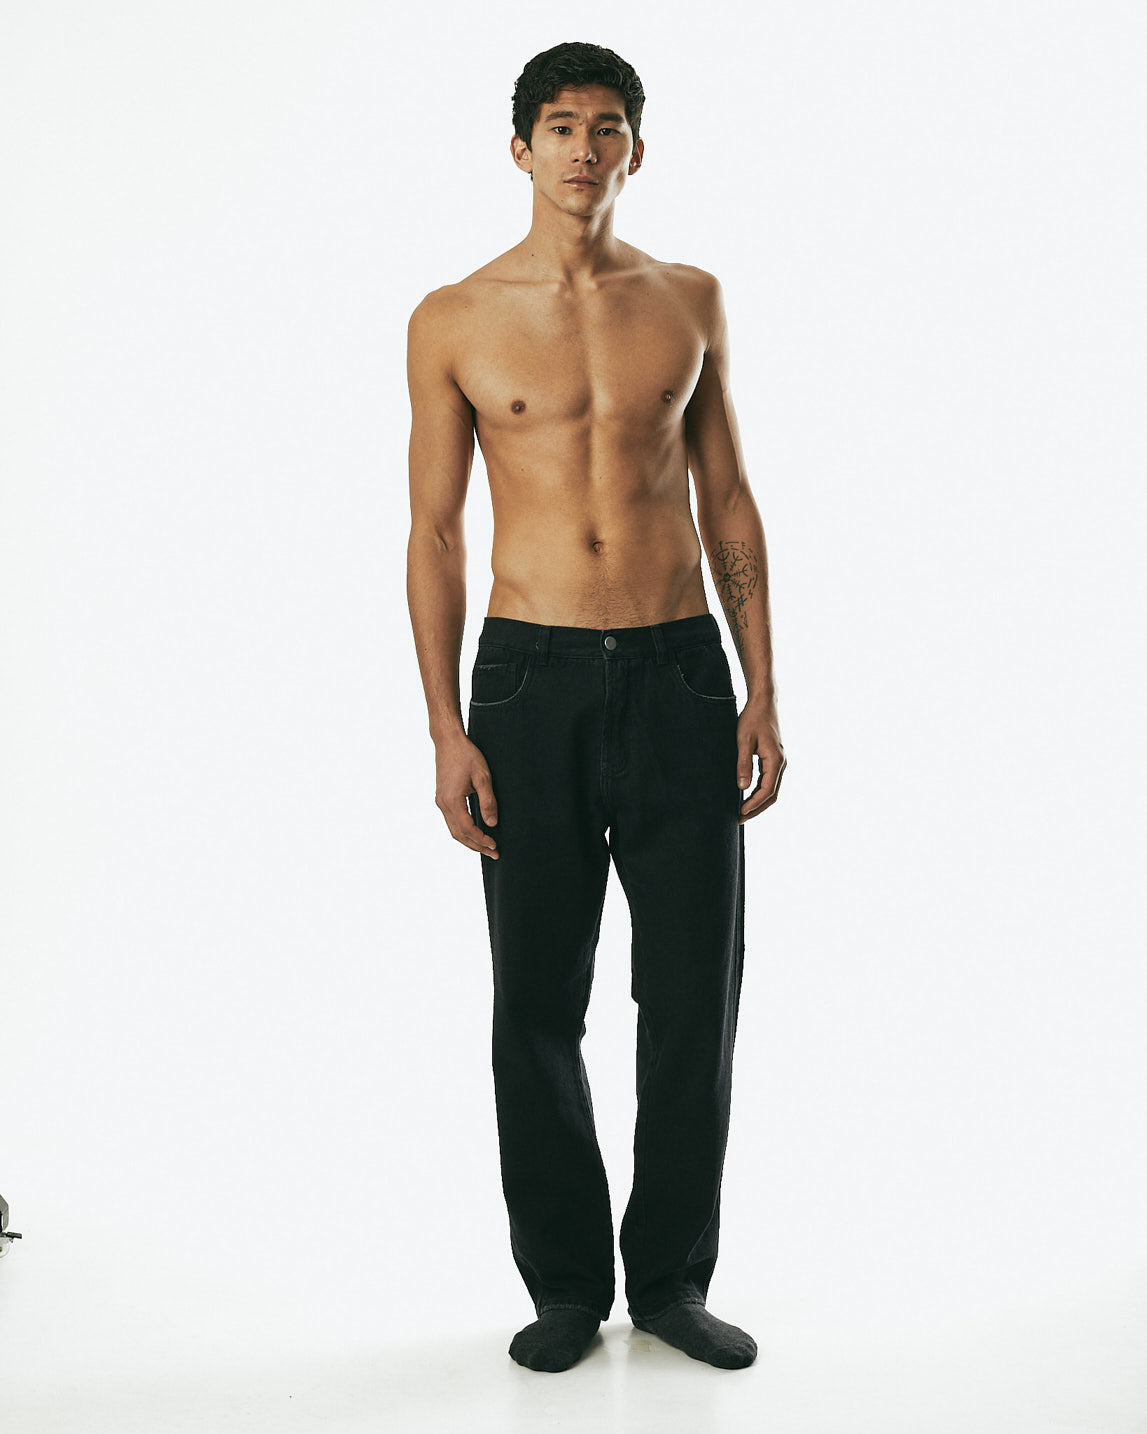 APHASE - Black Jeans Pant